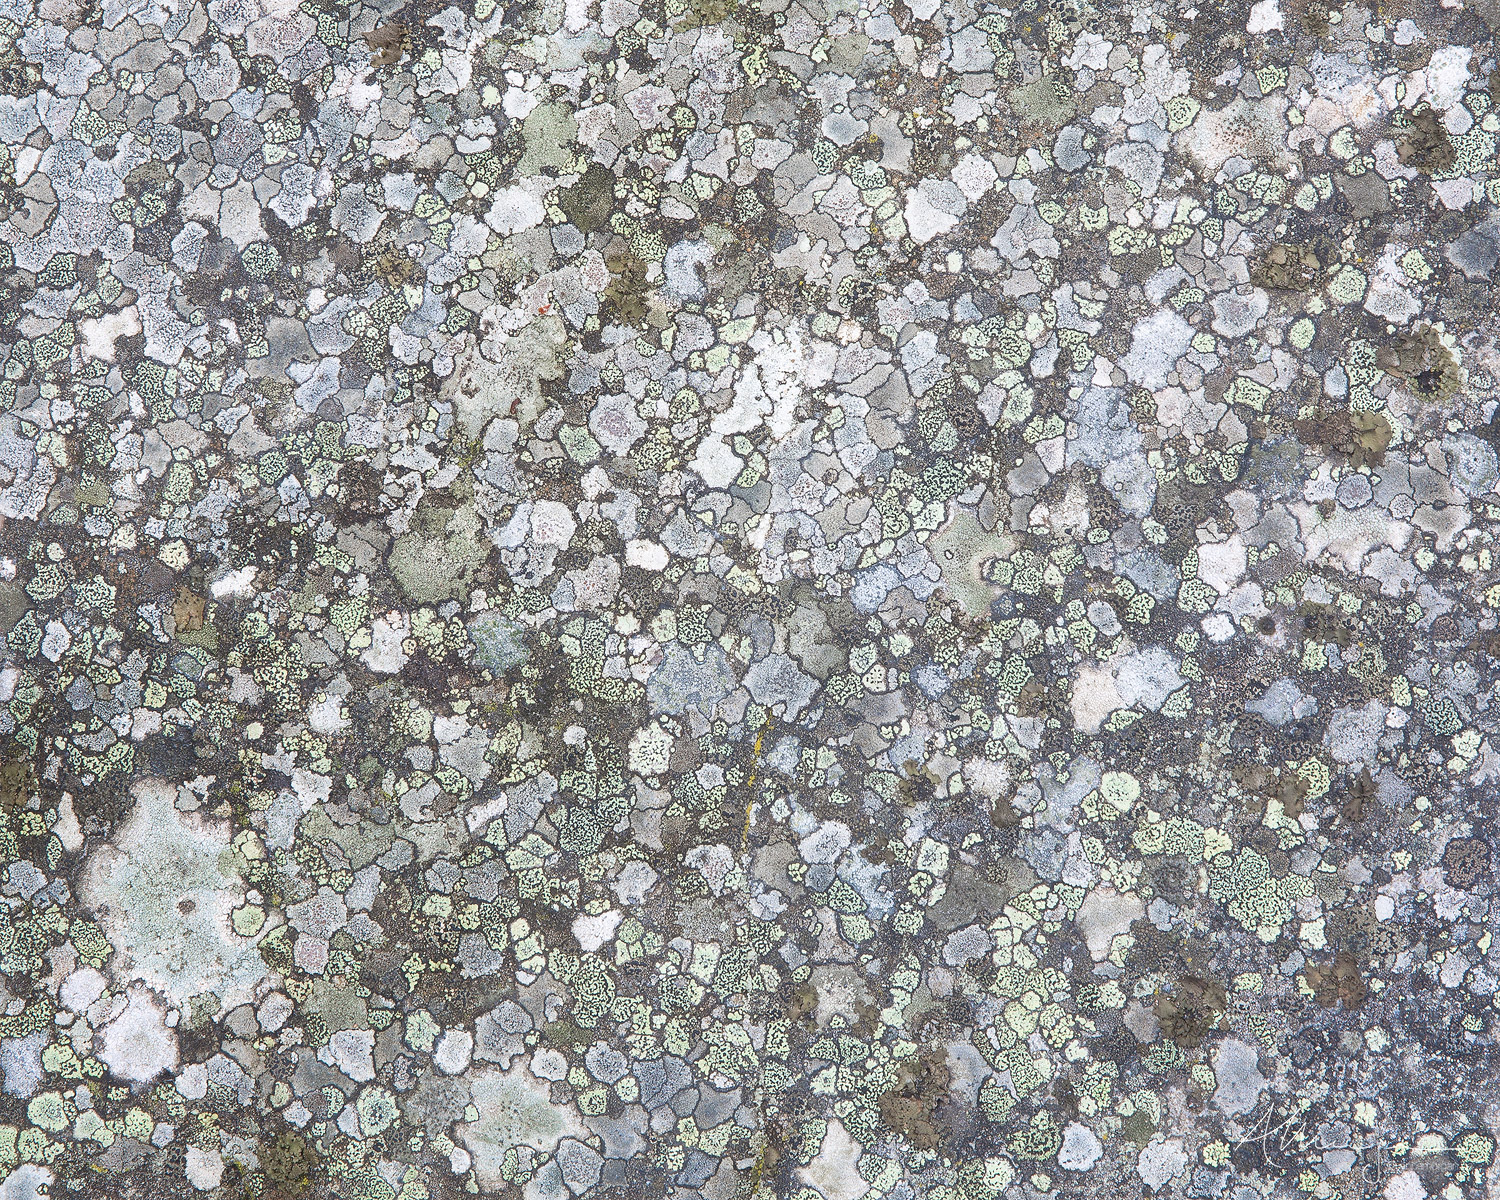 lichens colonise and completely cover a rock in Jasper National Park with a display of many shades of green